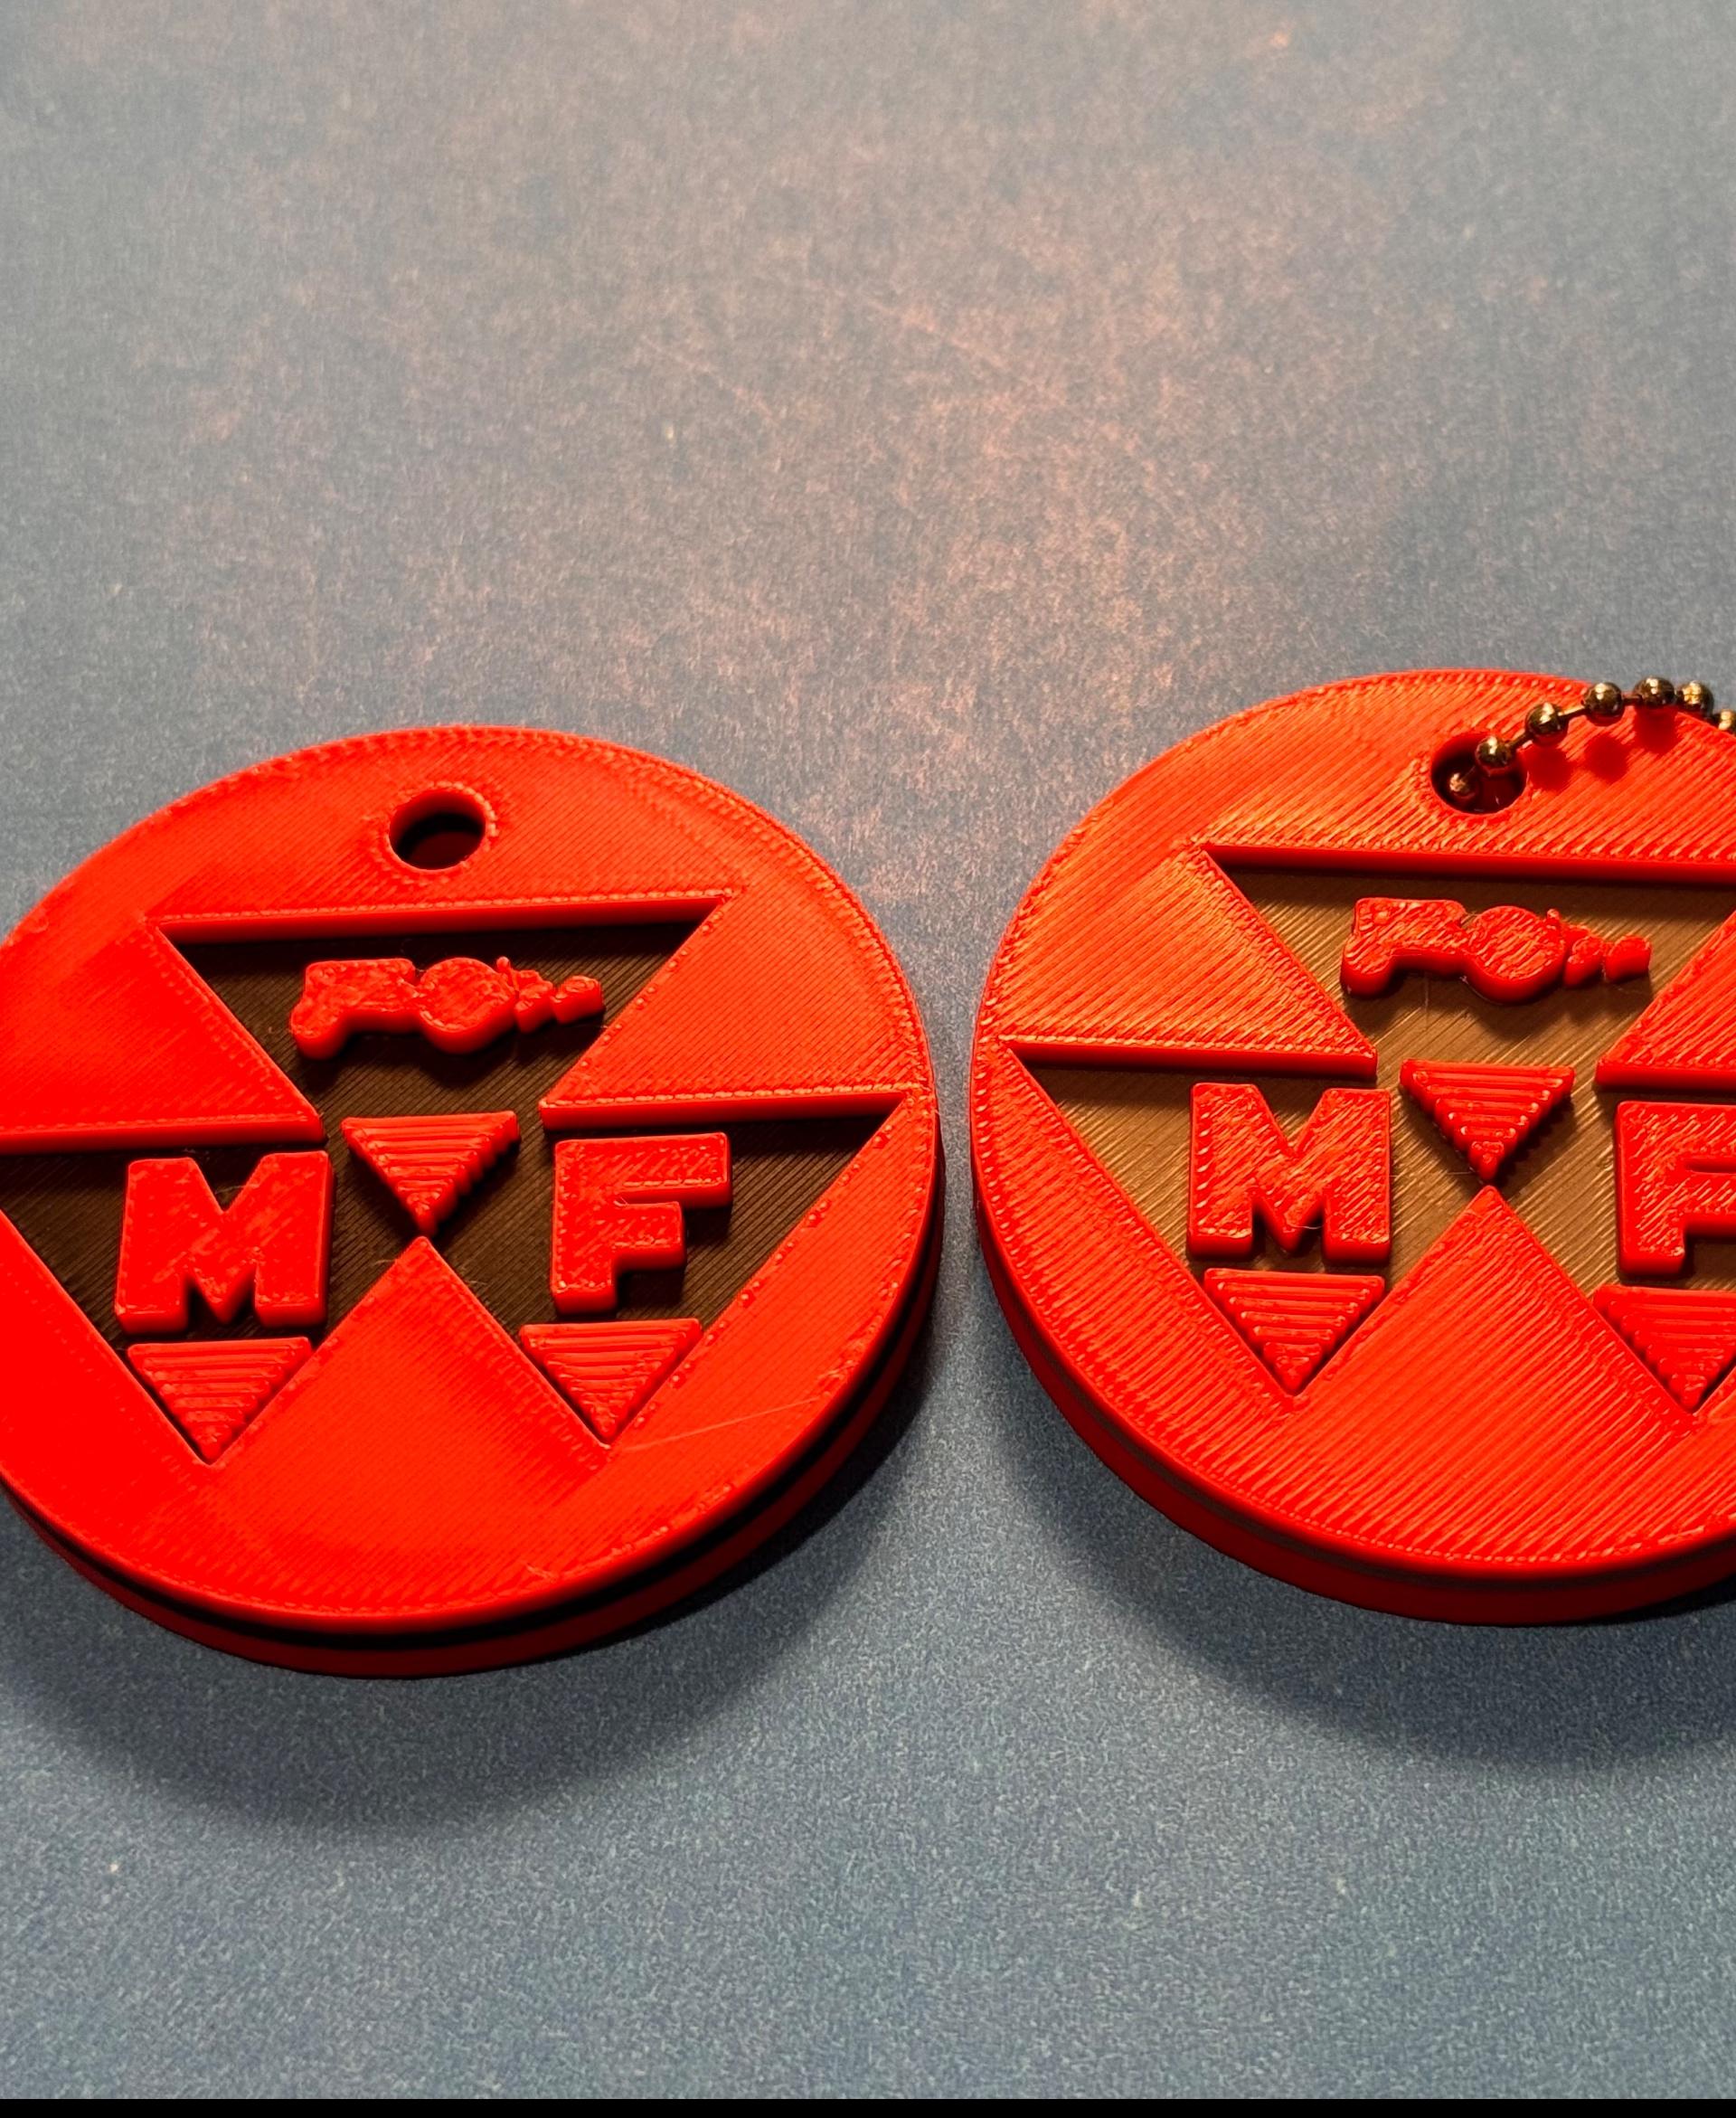 Massey Ferguson keychain - Printed perfectly on my X1C with the layer change recommendations. Great size for keeping track of my tractor keys. Did one in Black and the other in grey backgrounds.  - 3d model